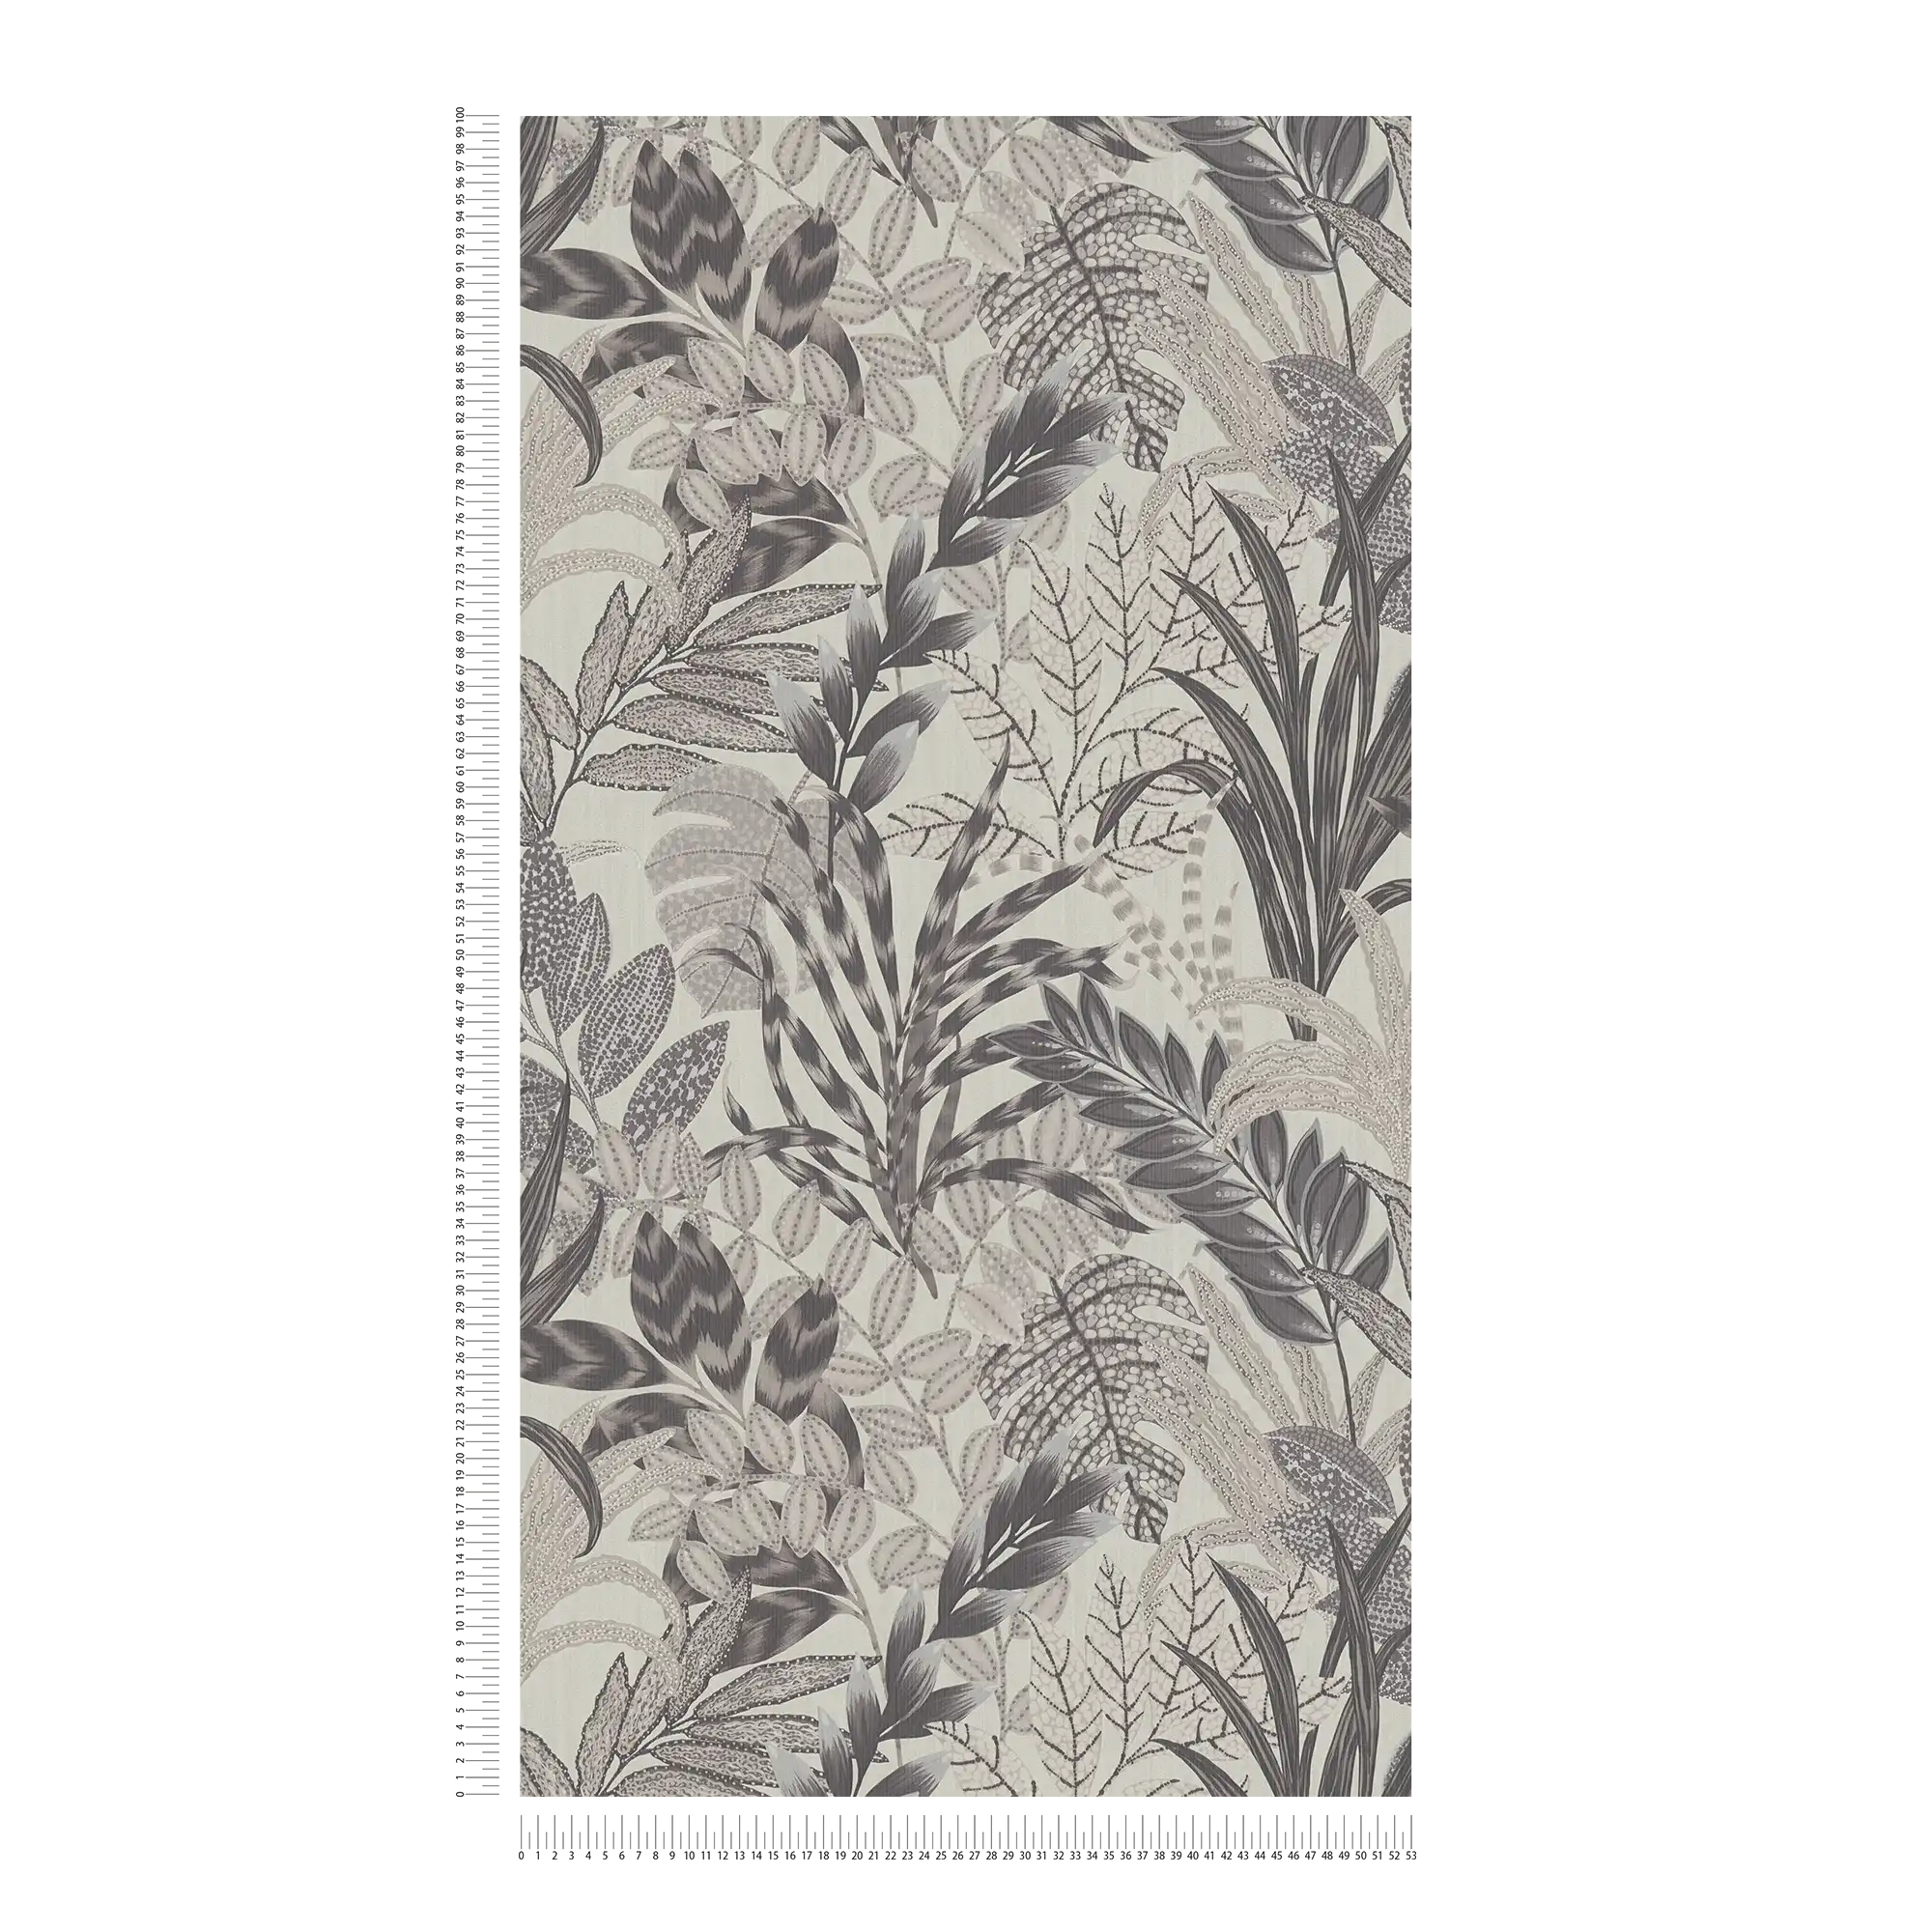             Monochrome jungle wallpaper with embossed texture - grey, white
        